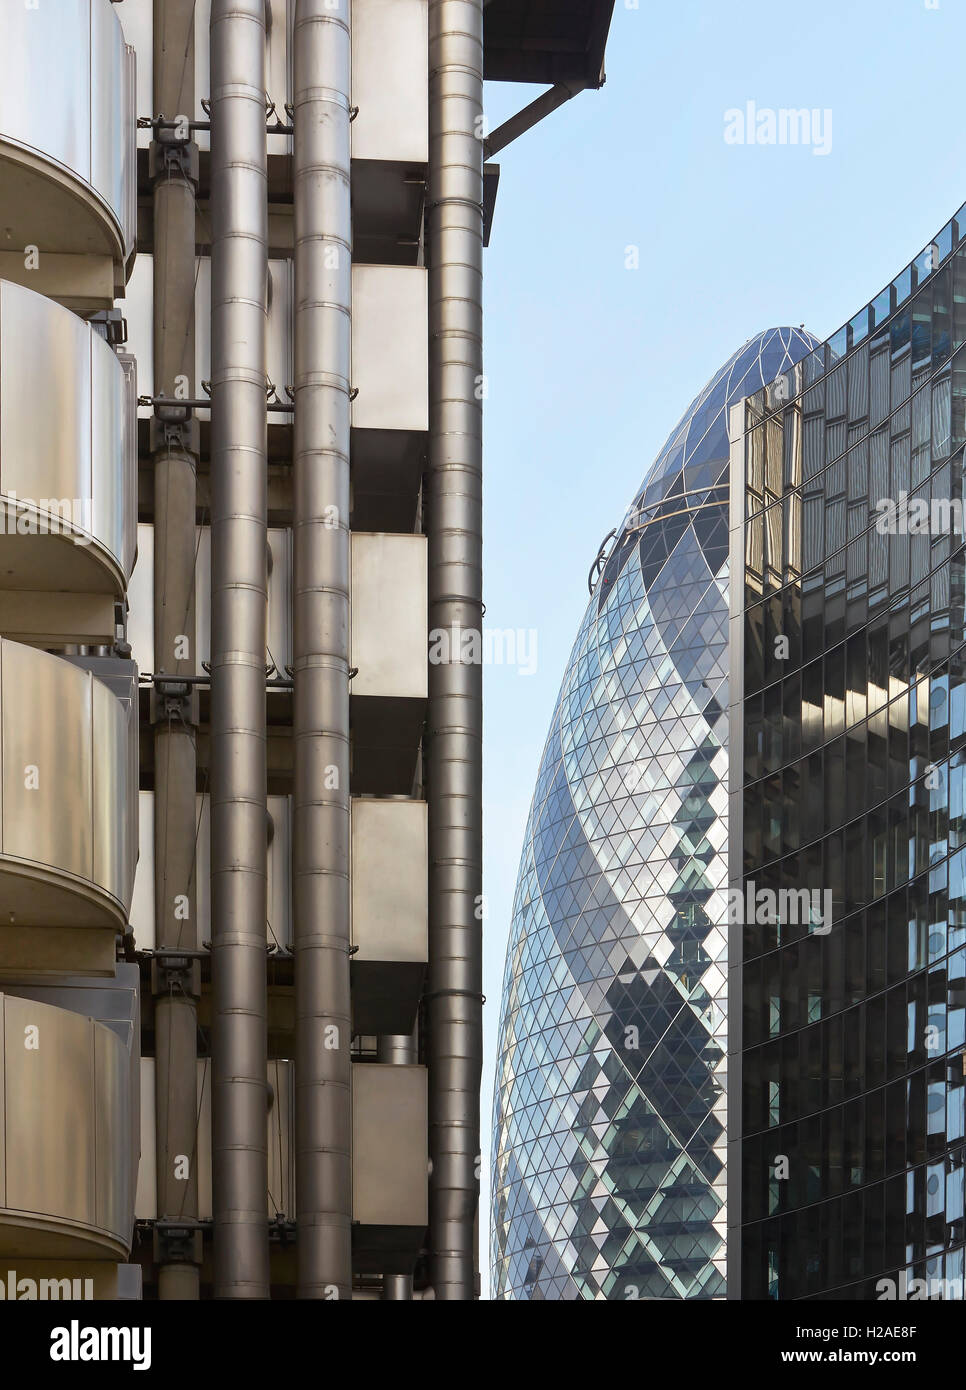 Iconic facades juxtaposed. The Gherkin, London, United Kingdom. Architect: Foster + Partners, 2004. Stock Photo